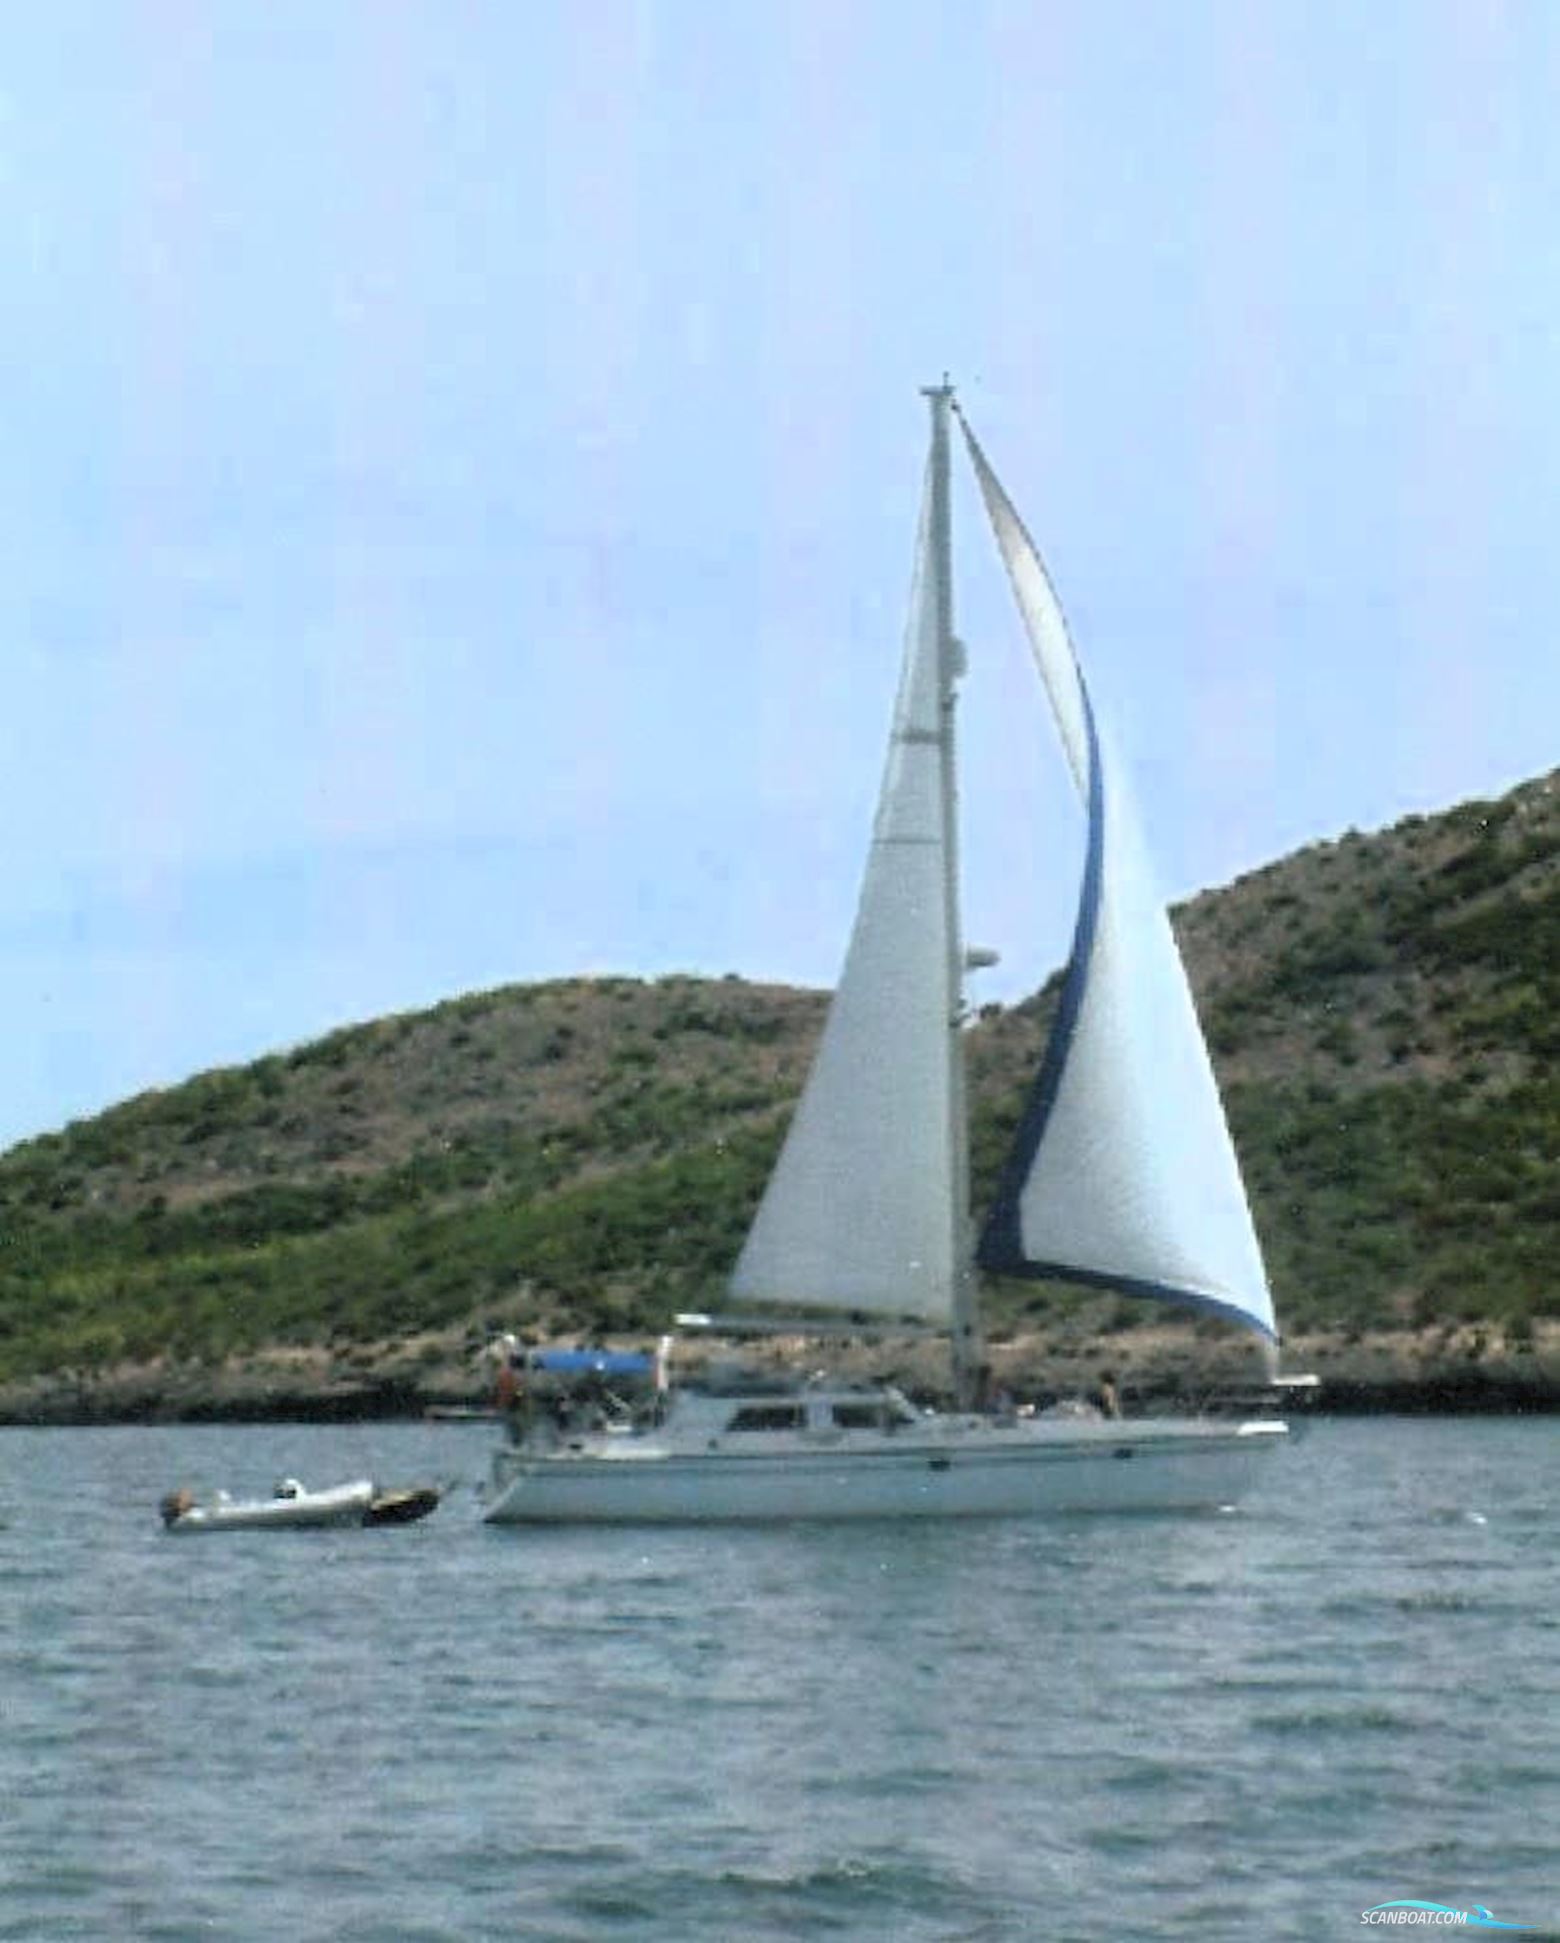 Moody Eclipse 43 Deck Saloon Sailing boat 1990, with Perkins Prima engine, Spain